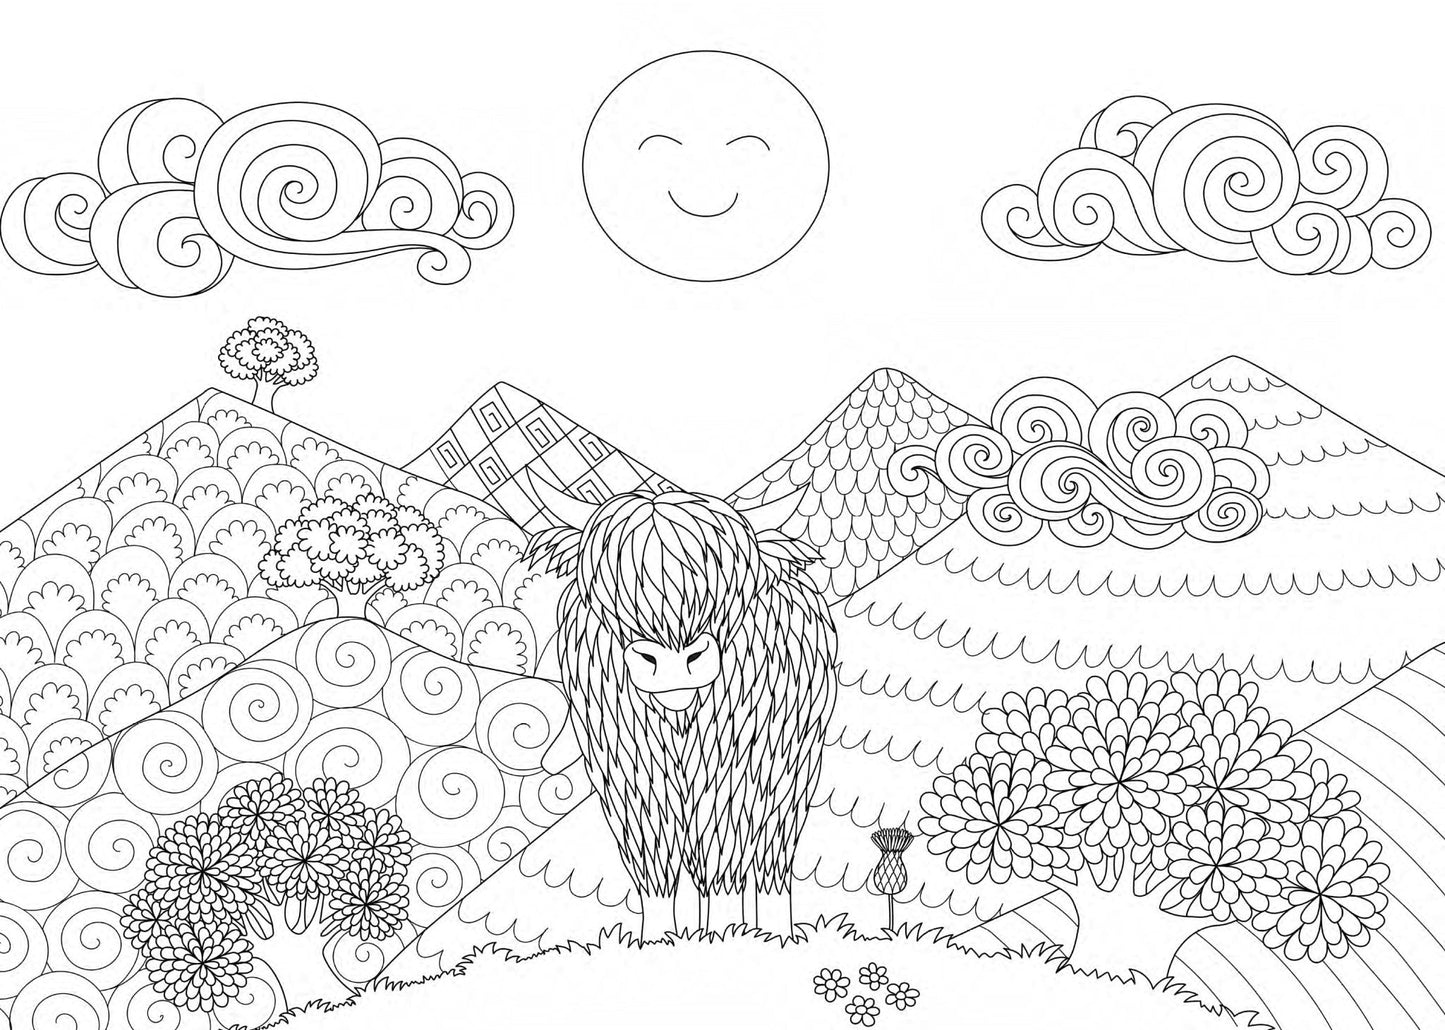 Landscapes Coloring Book Zentangle (Printbook) - Monsoon Publishing USA